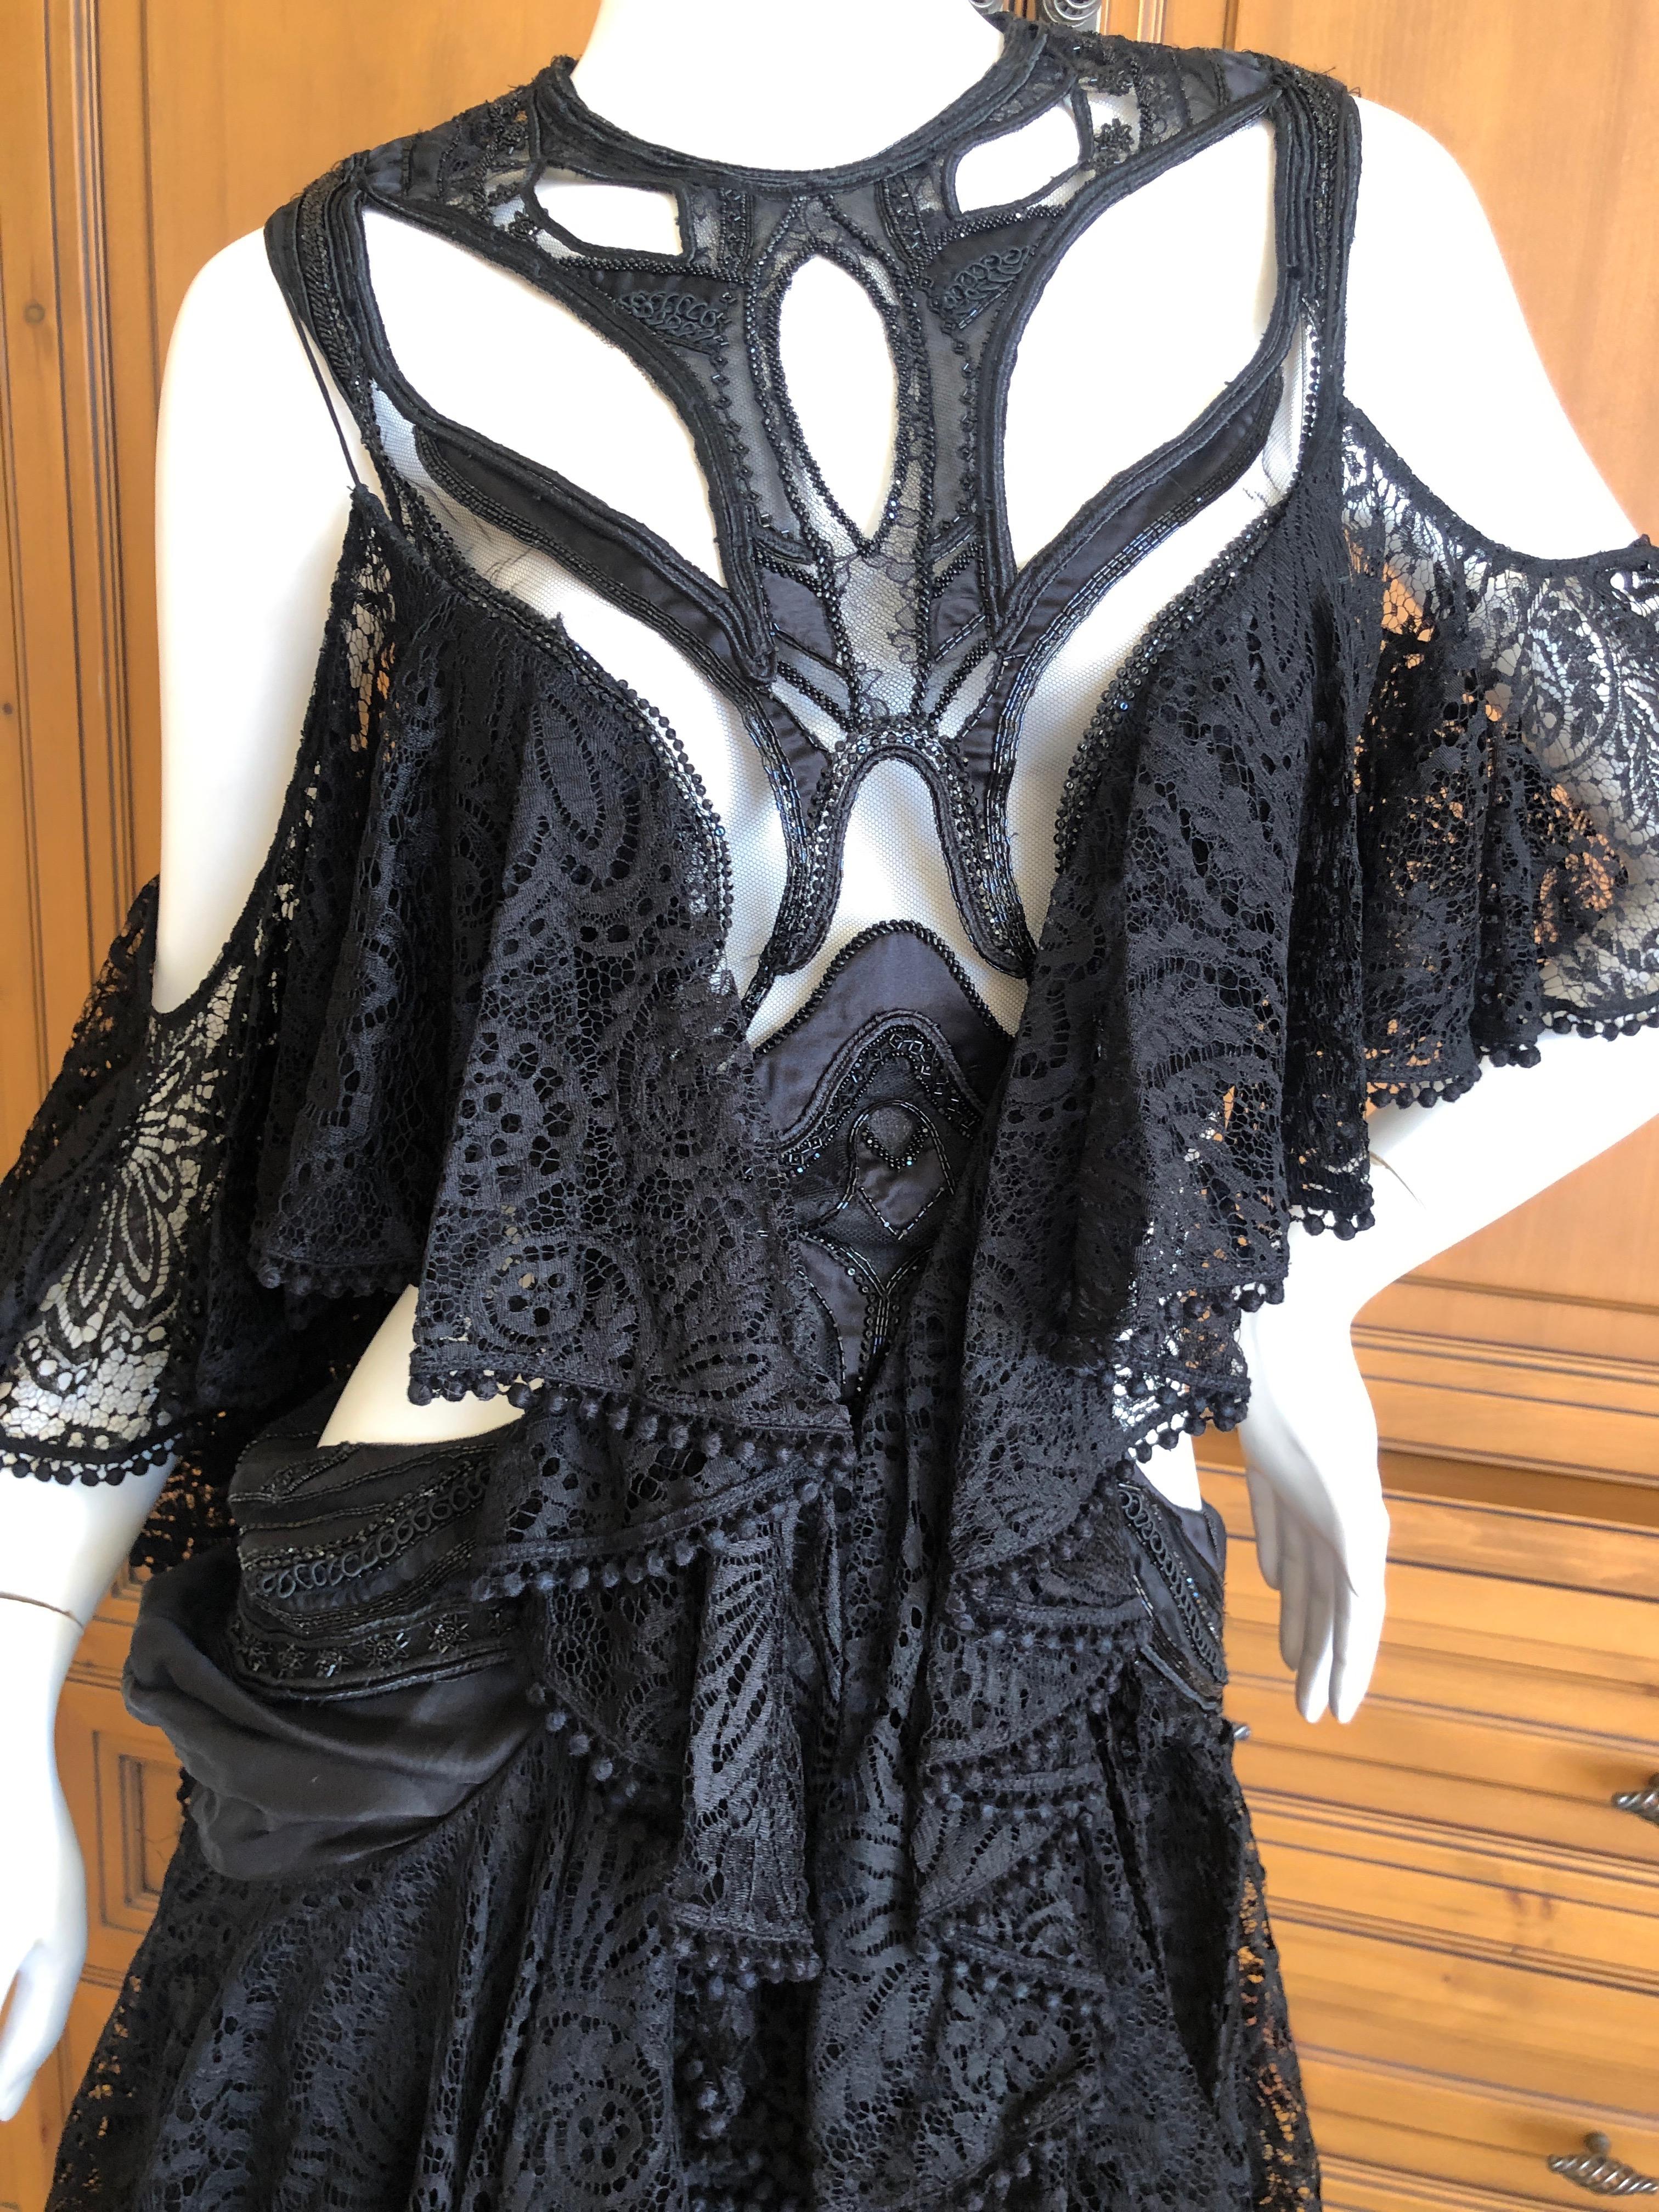 Alexander McQueen Pre Fall 2018 Goth Black Lace Beaded Dress by Sarah Burton For Sale 1